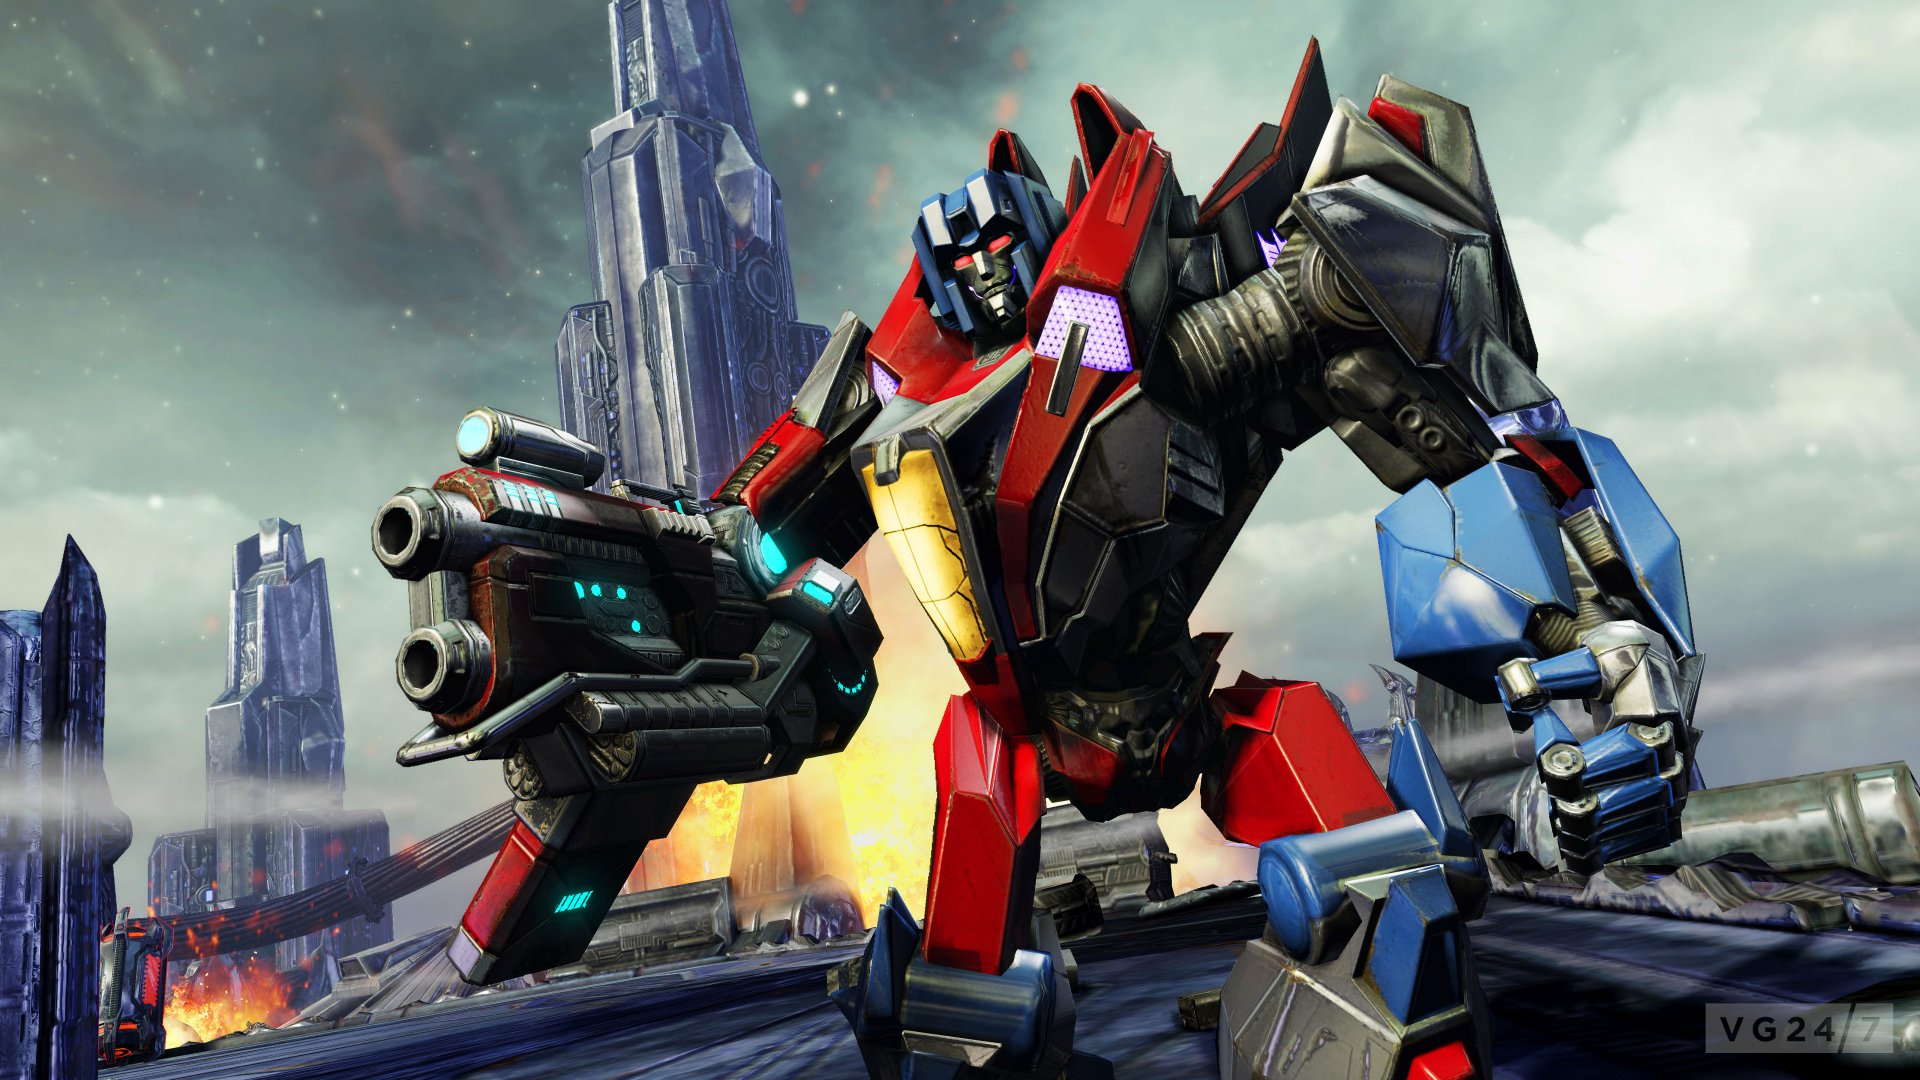 TransformersVR  Available now on PSVR on Twitter Lets add one of our  favourite Decepticons in there starscream transformers vr  httpstcoOLoQnNuK3b  Twitter